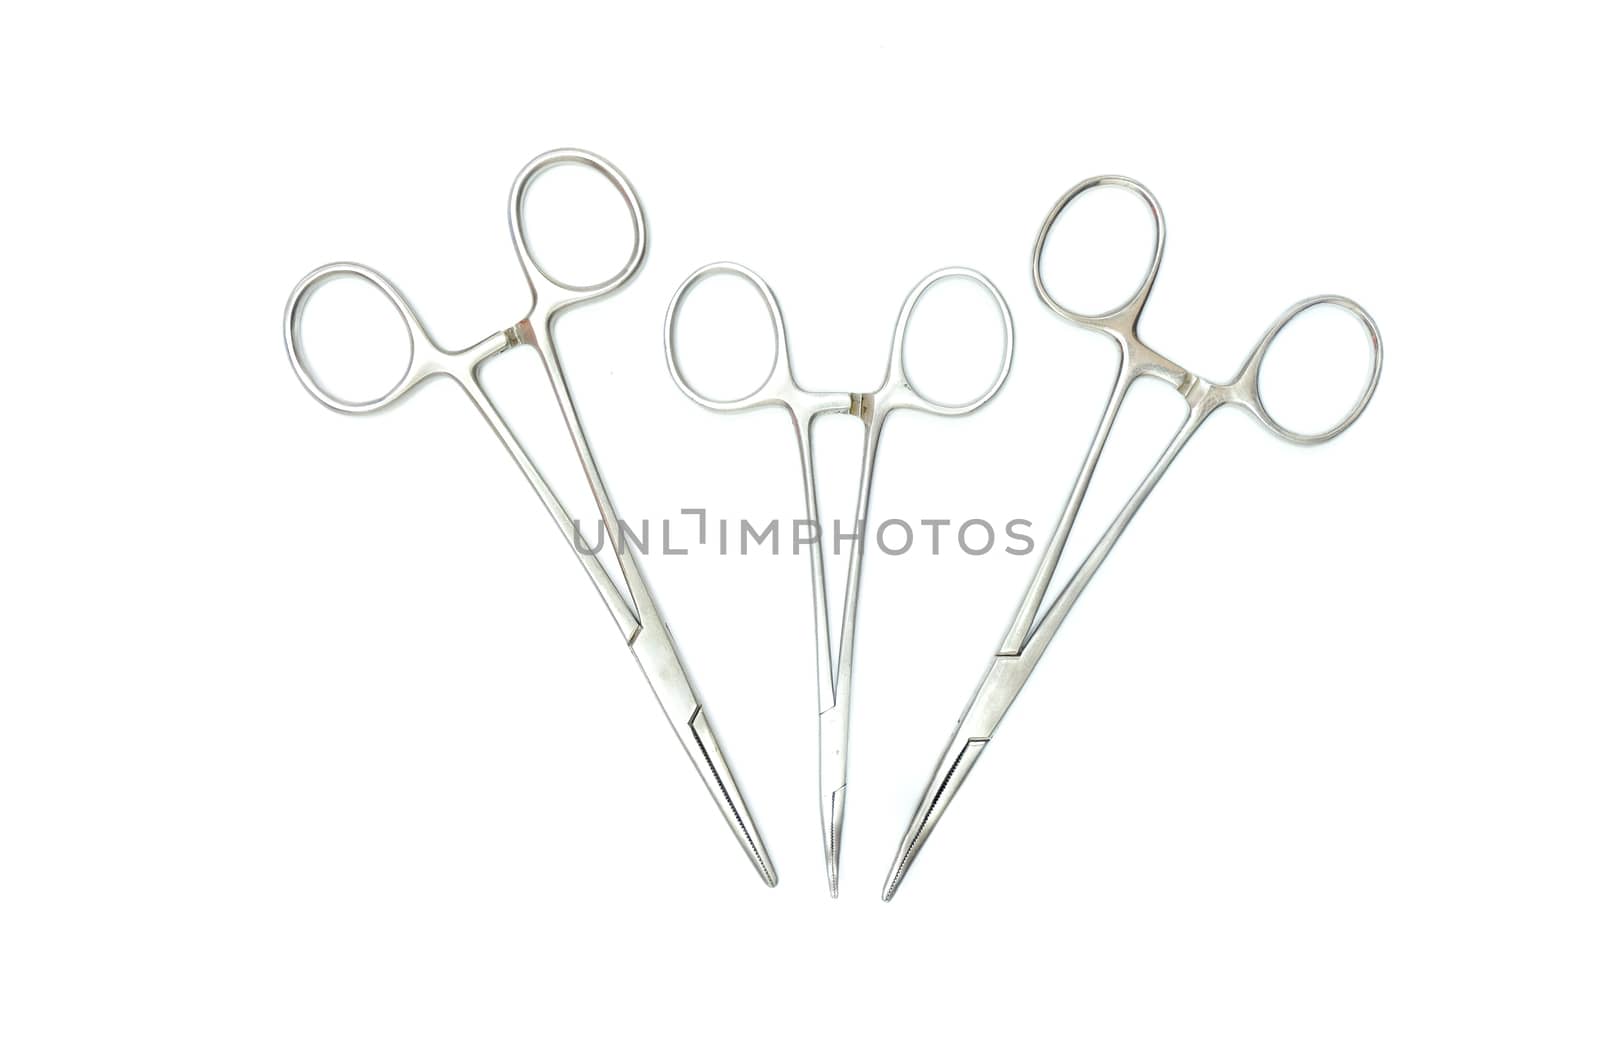 three surgical clamps, isolated on white background, top view